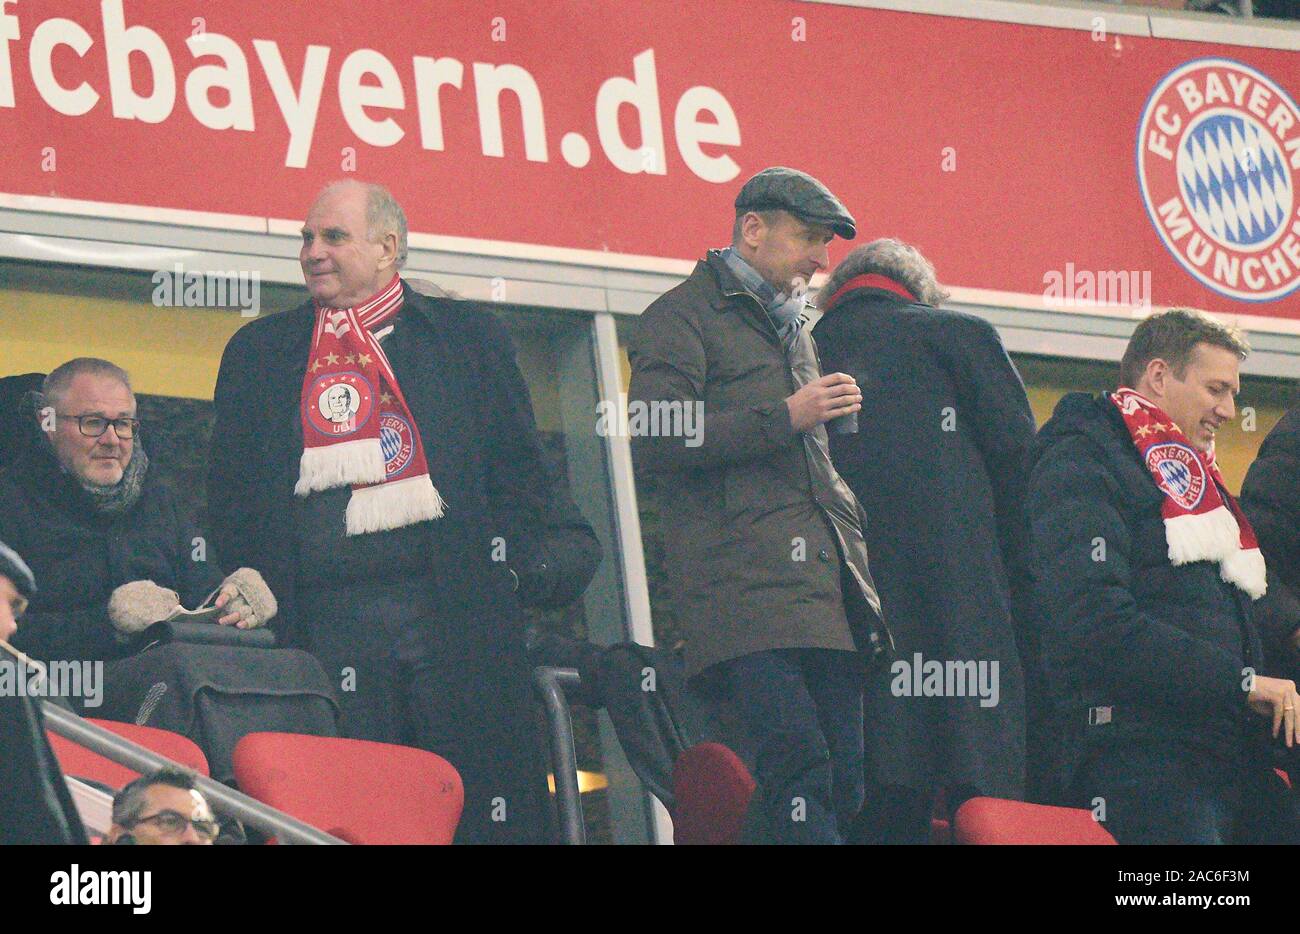 Munich, Germany. 30th Nov 2019. Football FC Bayern Munich - Leverkusen, Munich November 30, 2019. Uli HOENESS (former FCB President ),  Herbert Diess, VW Manager, Chairman of the Board of Management of Volkswagen AG, Chairman of the Supervisory Board of Skoda and Audi and Member of the Supervisory Board of Infineon,  FC BAYERN MUNICH - BAYER 04 LEVERKUSEN 1-2  - DFL REGULATIONS PROHIBIT ANY USE OF PHOTOGRAPHS as IMAGE SEQUENCES and/or QUASI-VIDEO -  1.German Soccer League , Munich, November 30, 2019  Season 2019/2020, matchday 13, FCB, München © Peter Schatz / Alamy Live News Stock Photo